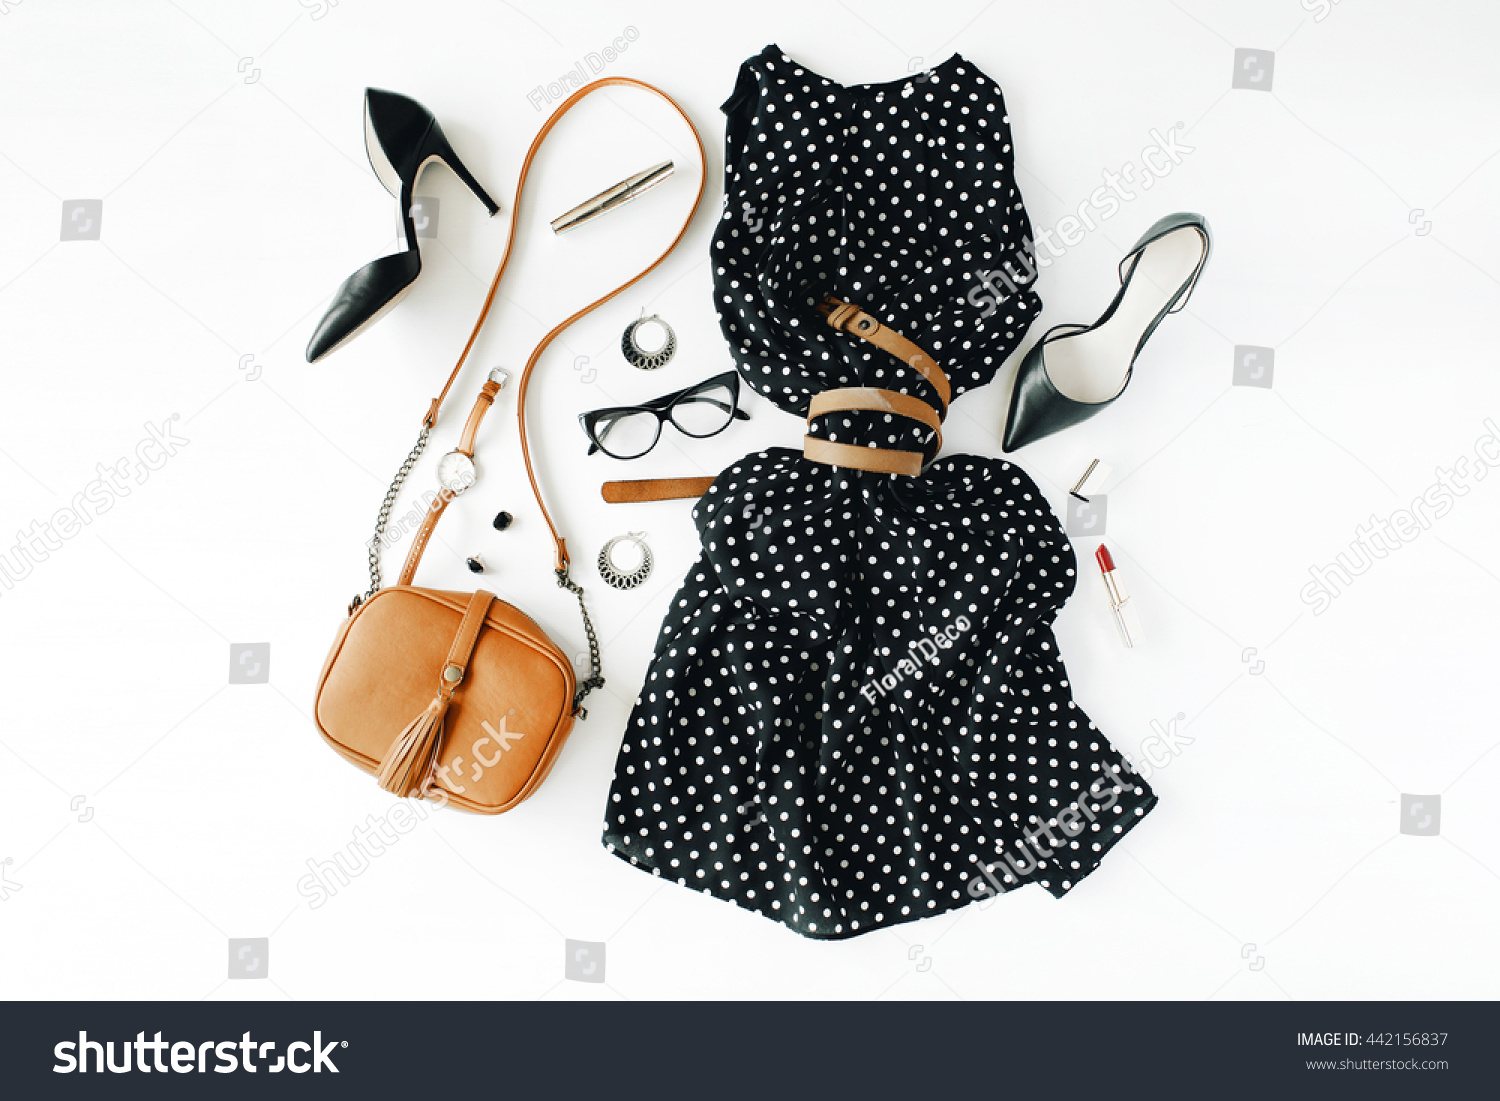 Flat Lay Feminine Clothes Accessories Collage Stock Photo 442156837 ...